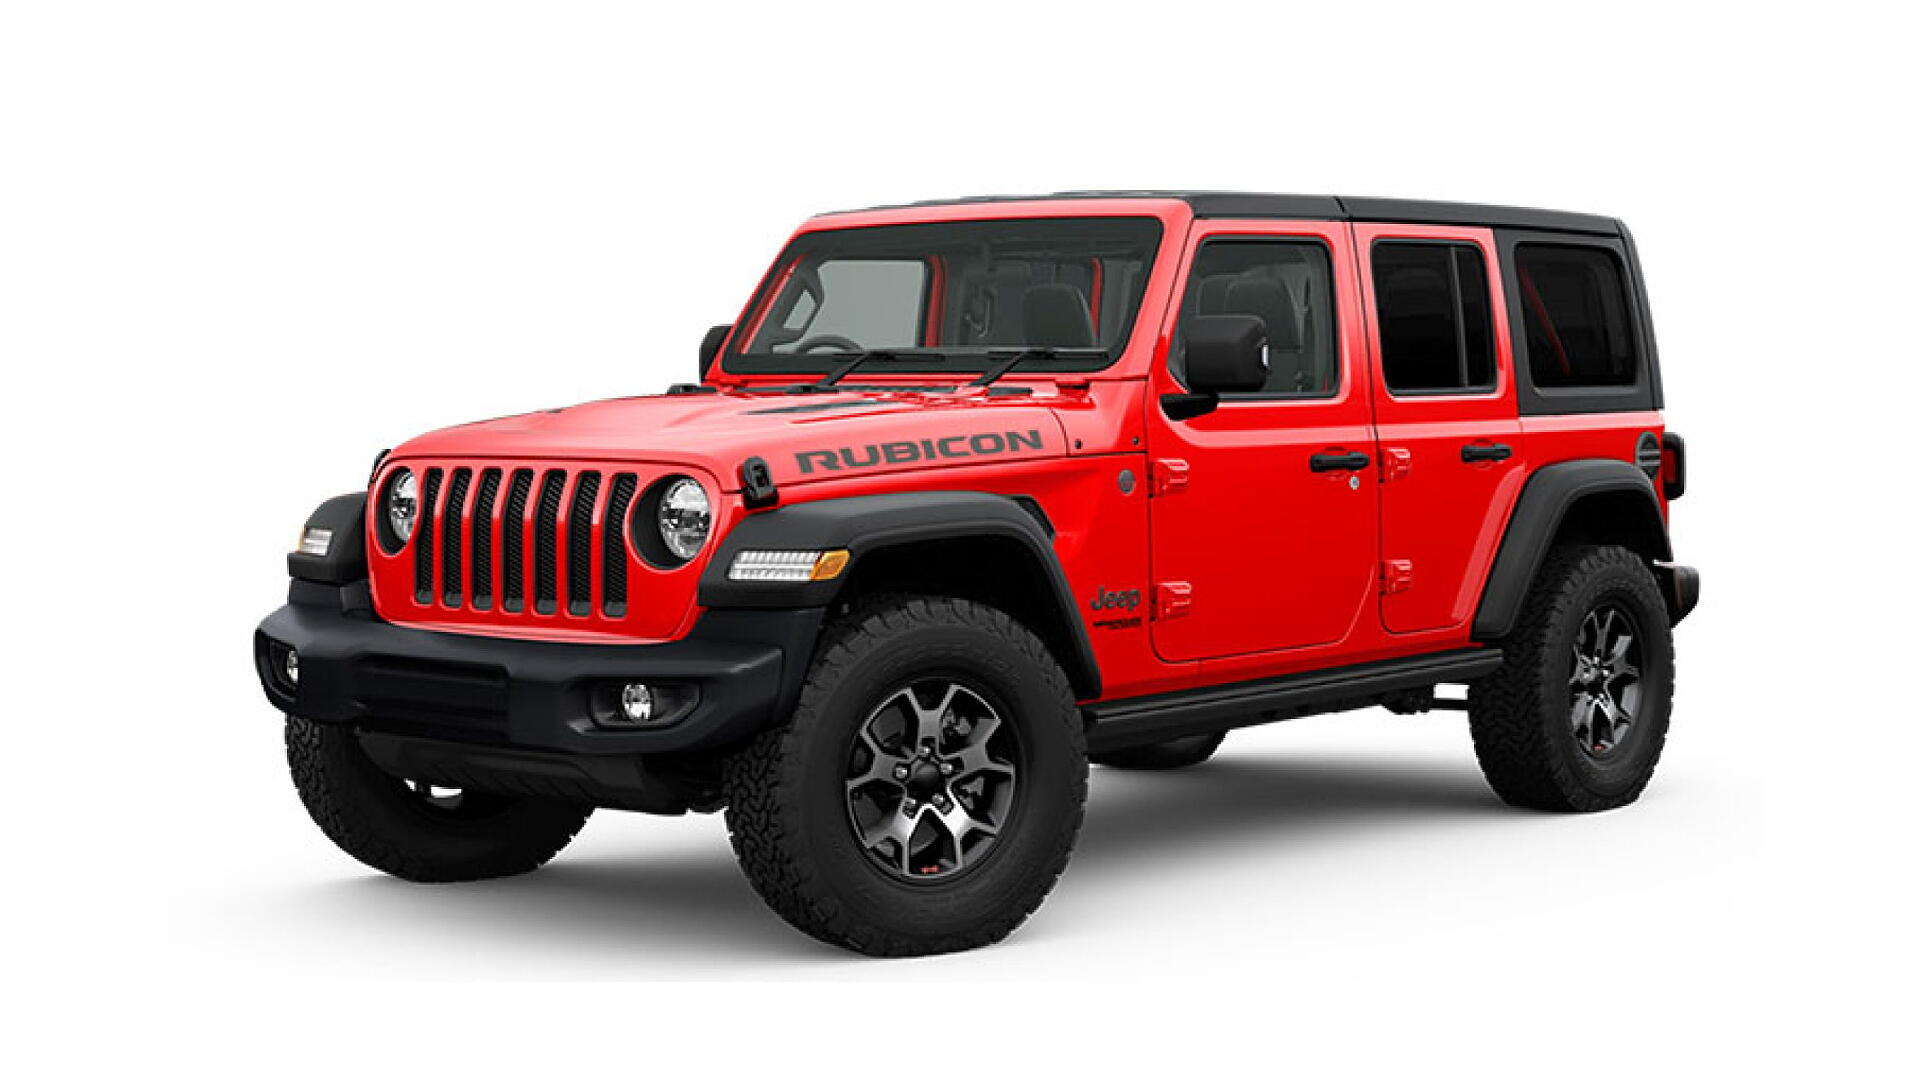 Jeep Wrangler Rubicon (Wrangler Top Model) On Road Price, Specs, Review,  Images, Colours | CarTrade